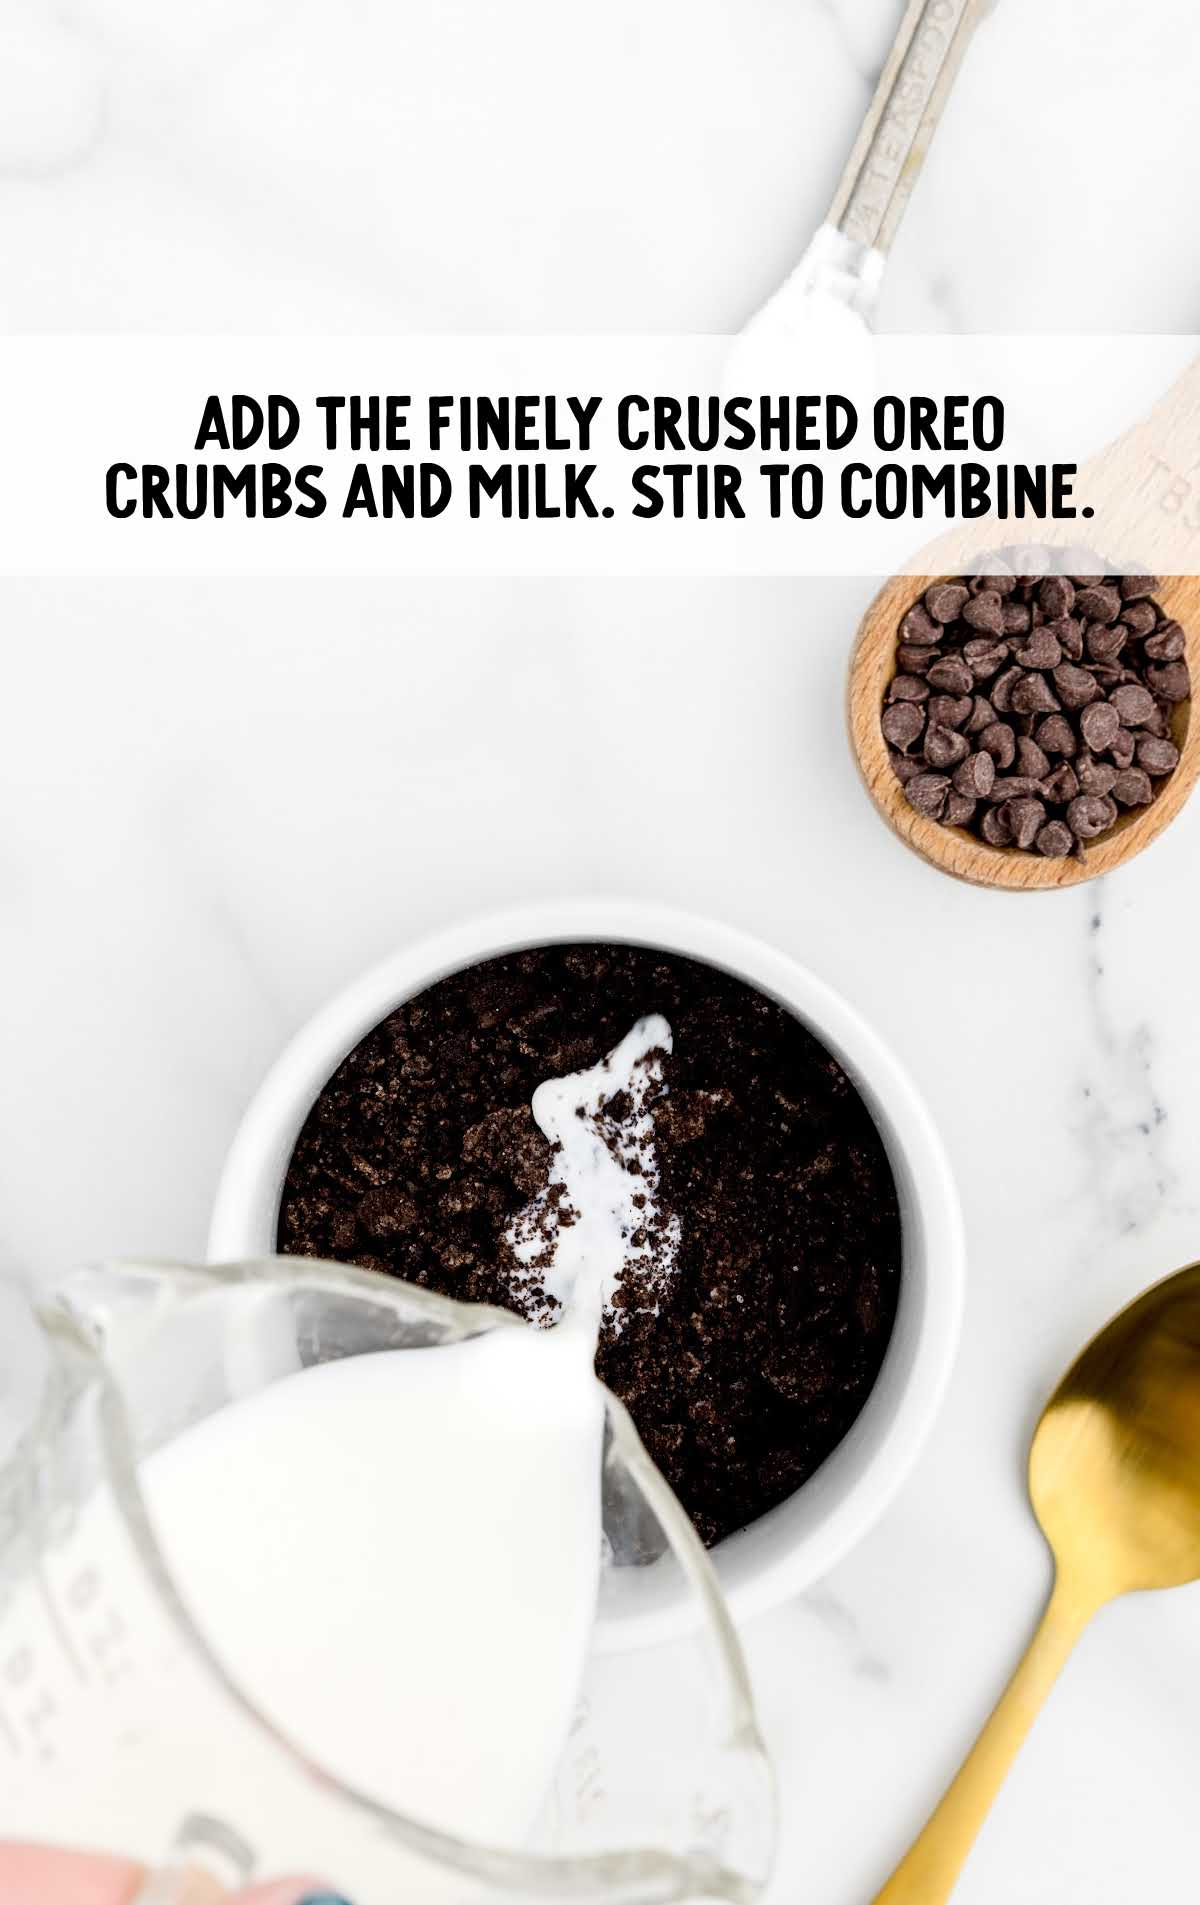 crushed oreo crumbs and milk combined together